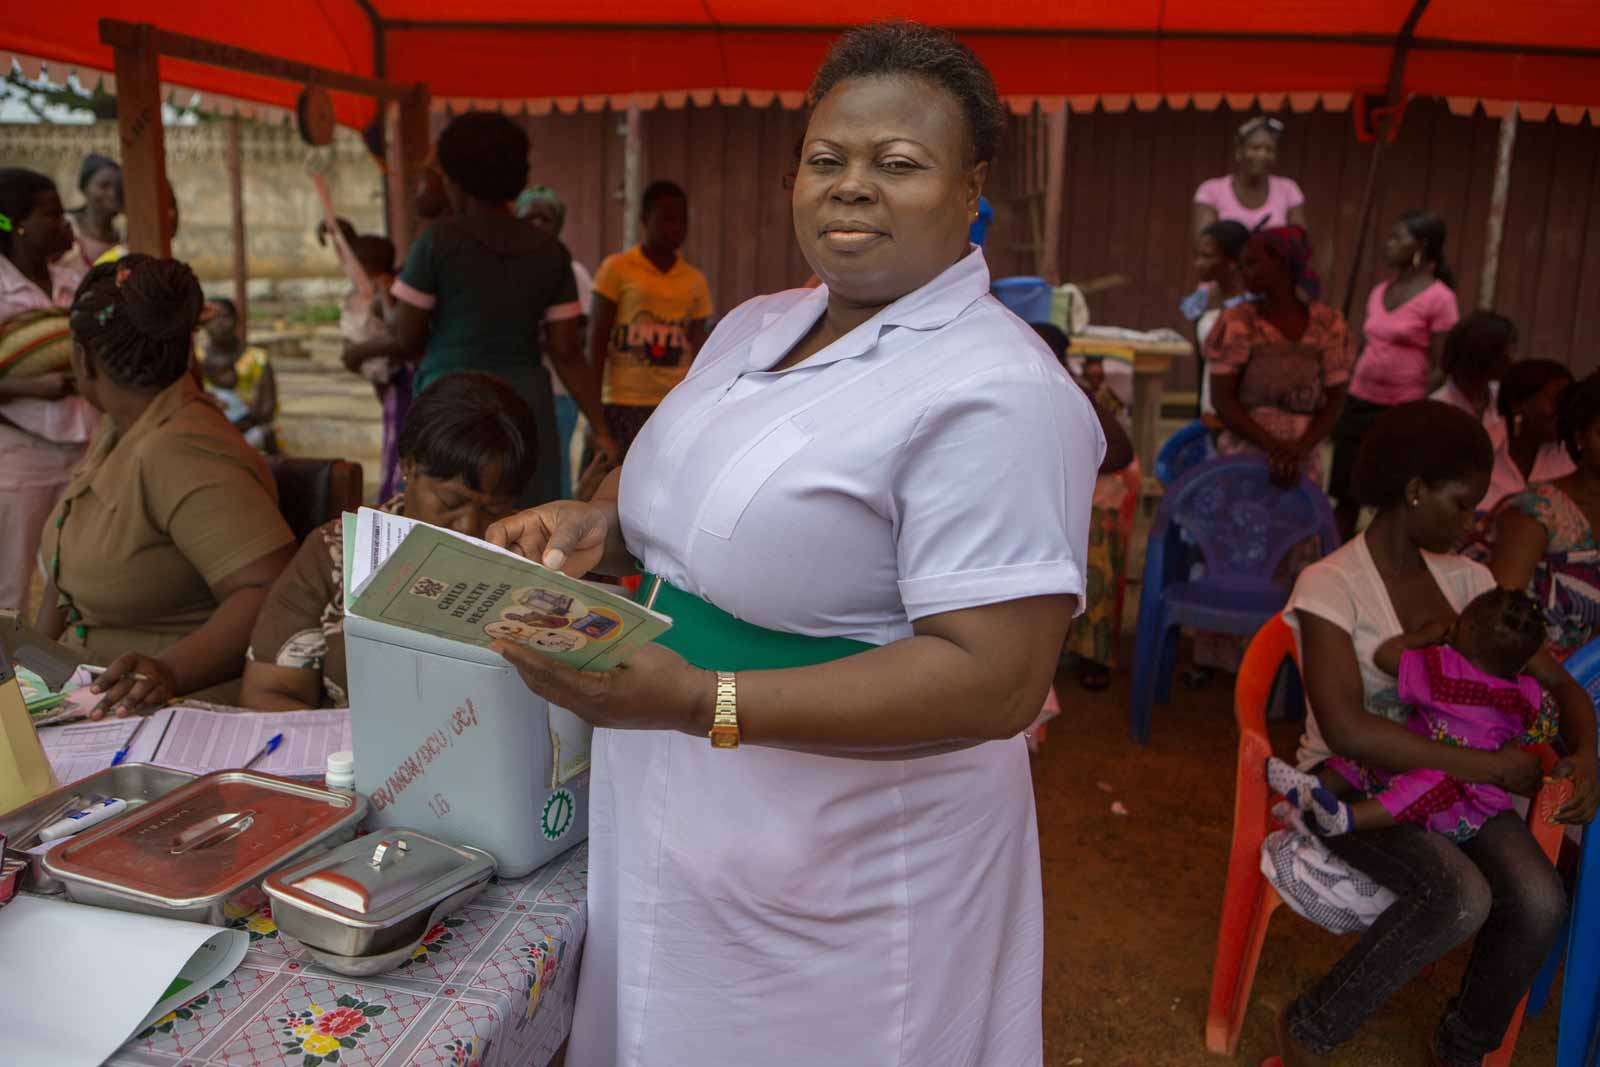 At the clinic, which is run out of an empty market stall, community health worker Mavis Adjetey weighs babies before administering vaccines.